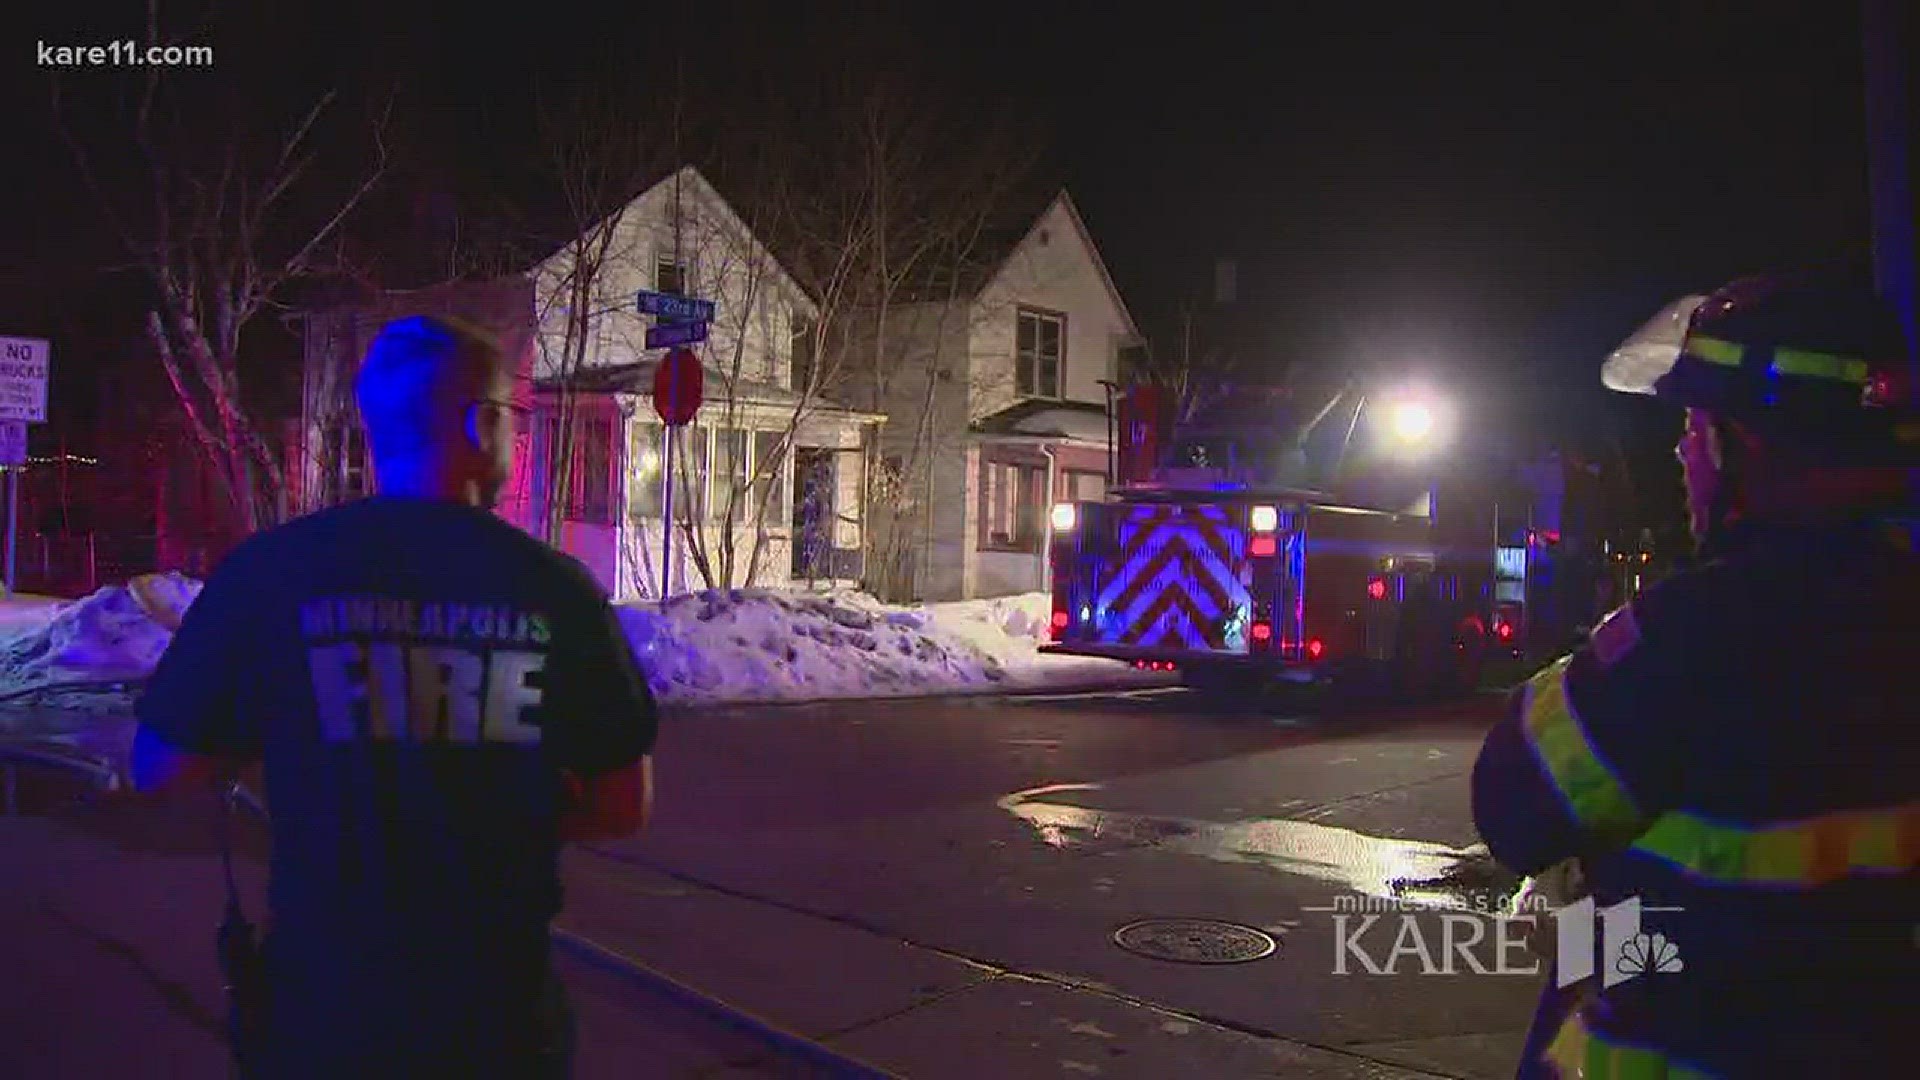 Man dies after being pulled from fire at Mpls. home